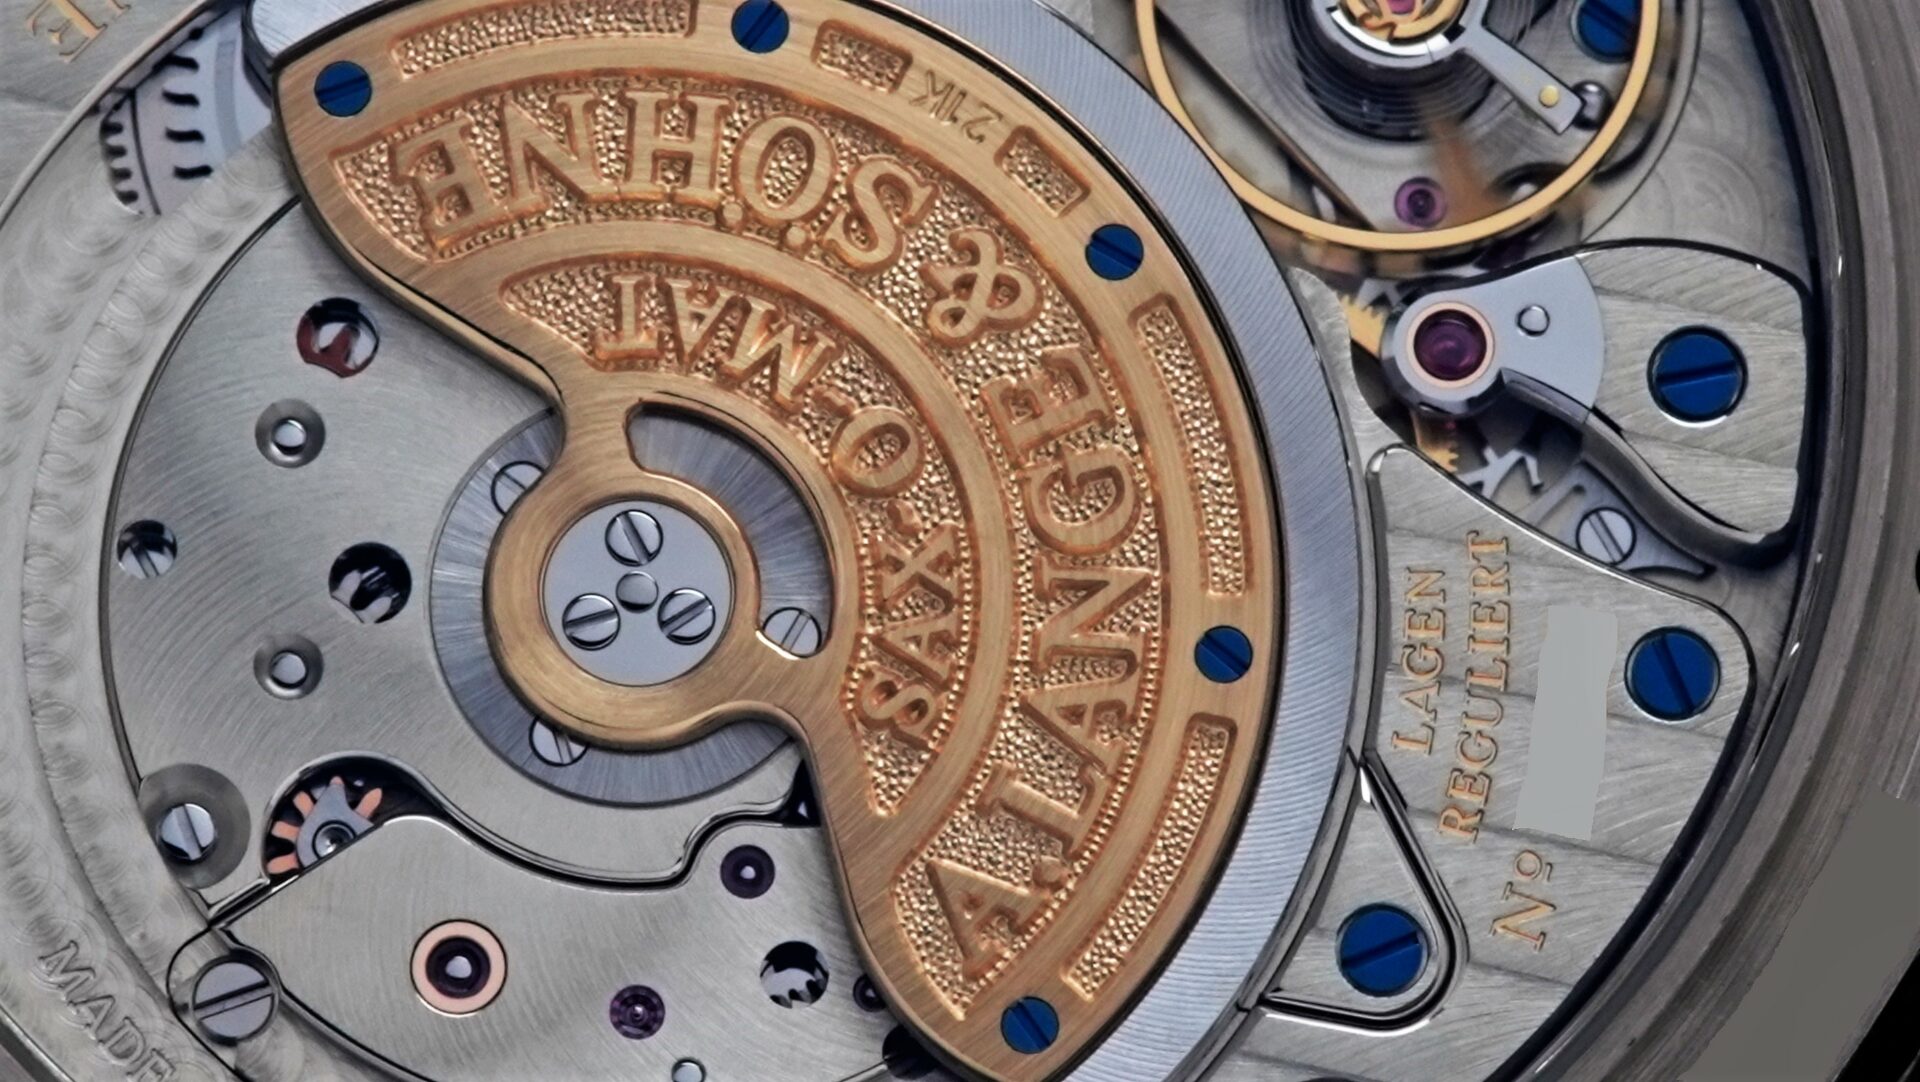 Zoomed in shot of the back side of the A. Lange & Söhne Saxonia Annual Calendar watch.